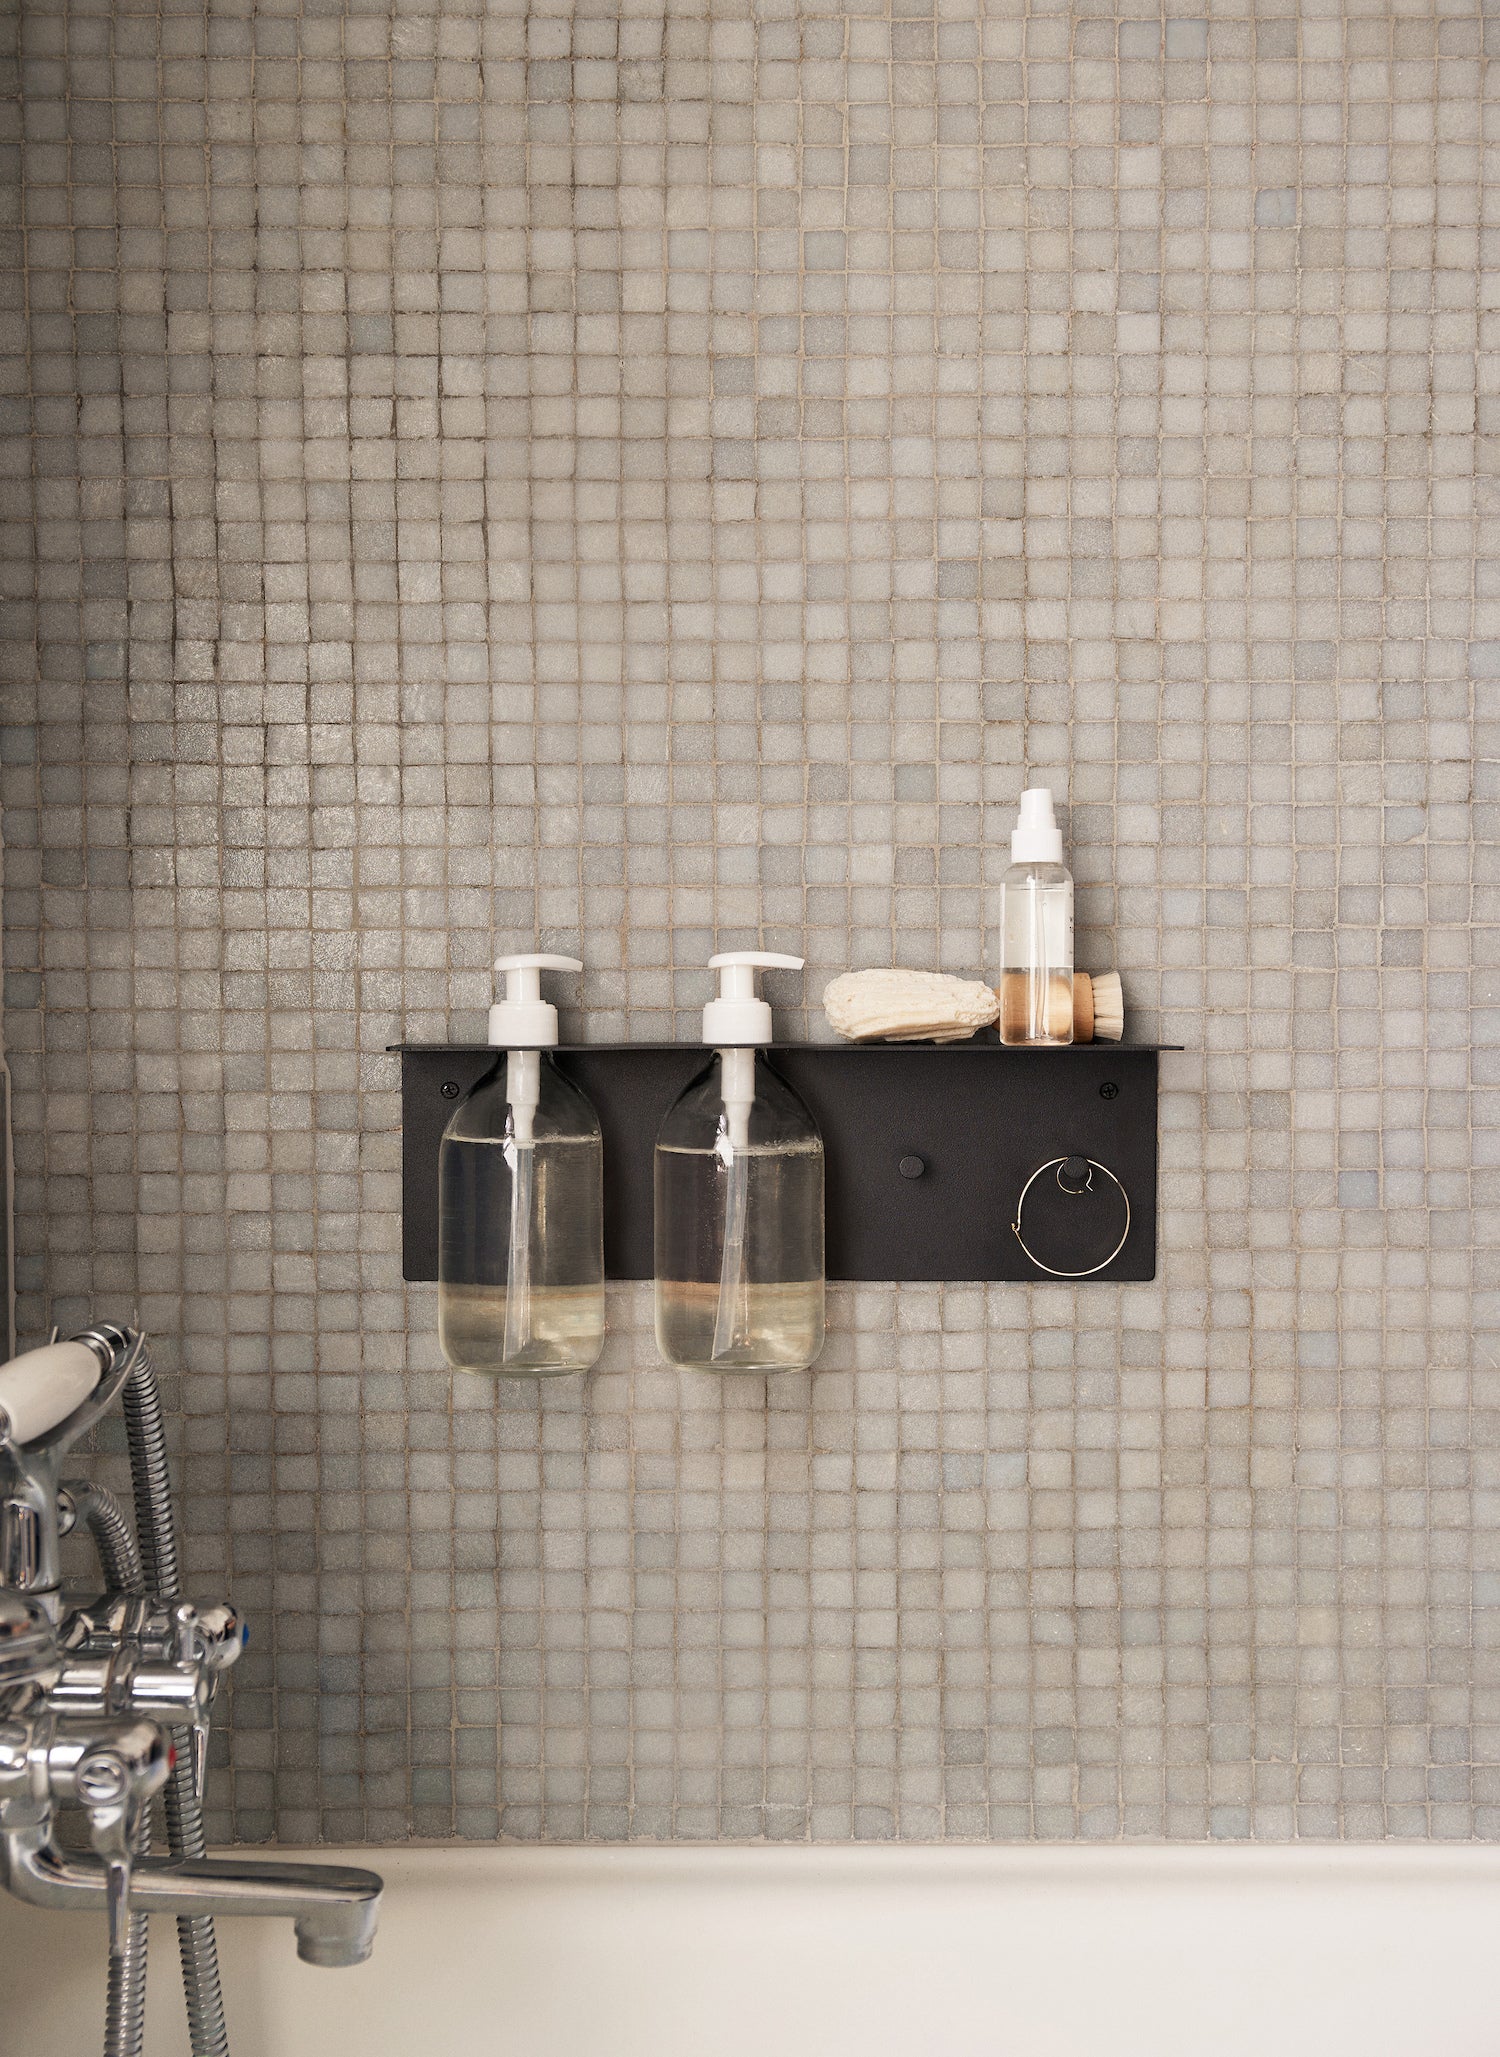 Dora Bathroom Shelf. A simple yet functional shelf featuring two holes for pump bottles, allowing you to smartly suspend them from the wall, as well as two hooks from which you can hang brushes or shower sponges. 